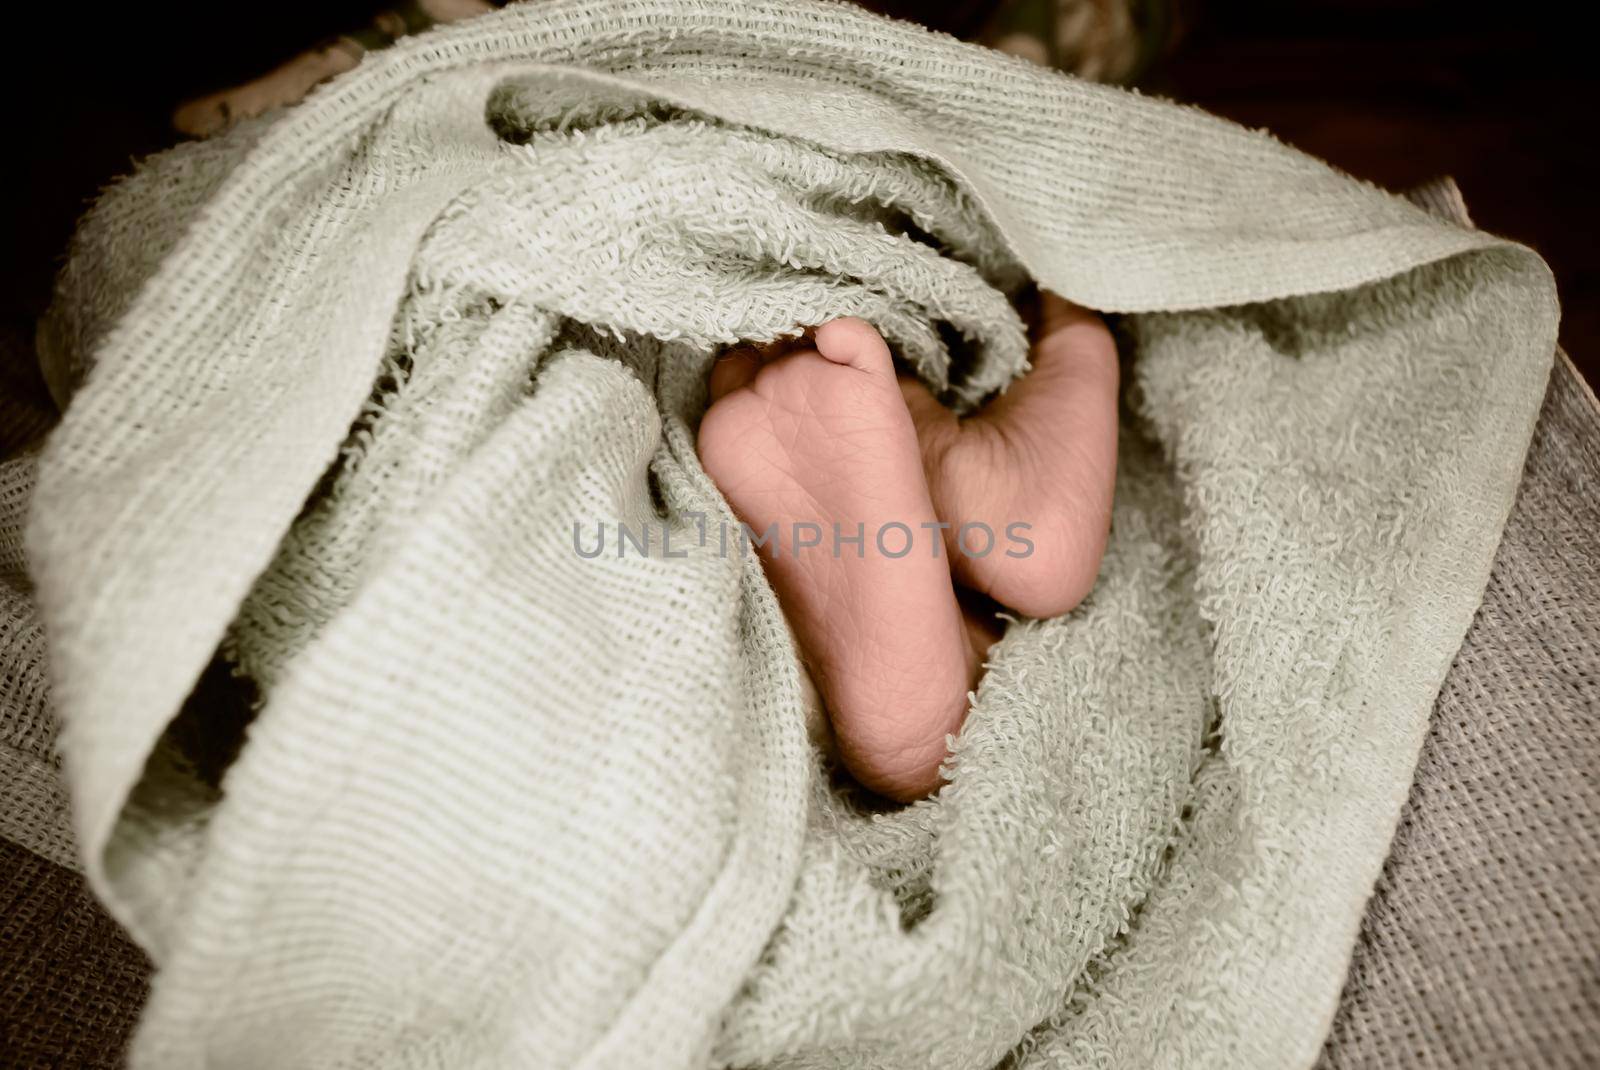 Newborn baby feet close up. The legs of a new born infant kid on a soft baby fur blanket. Cute love cozy background. Vintage color image. Copy space.